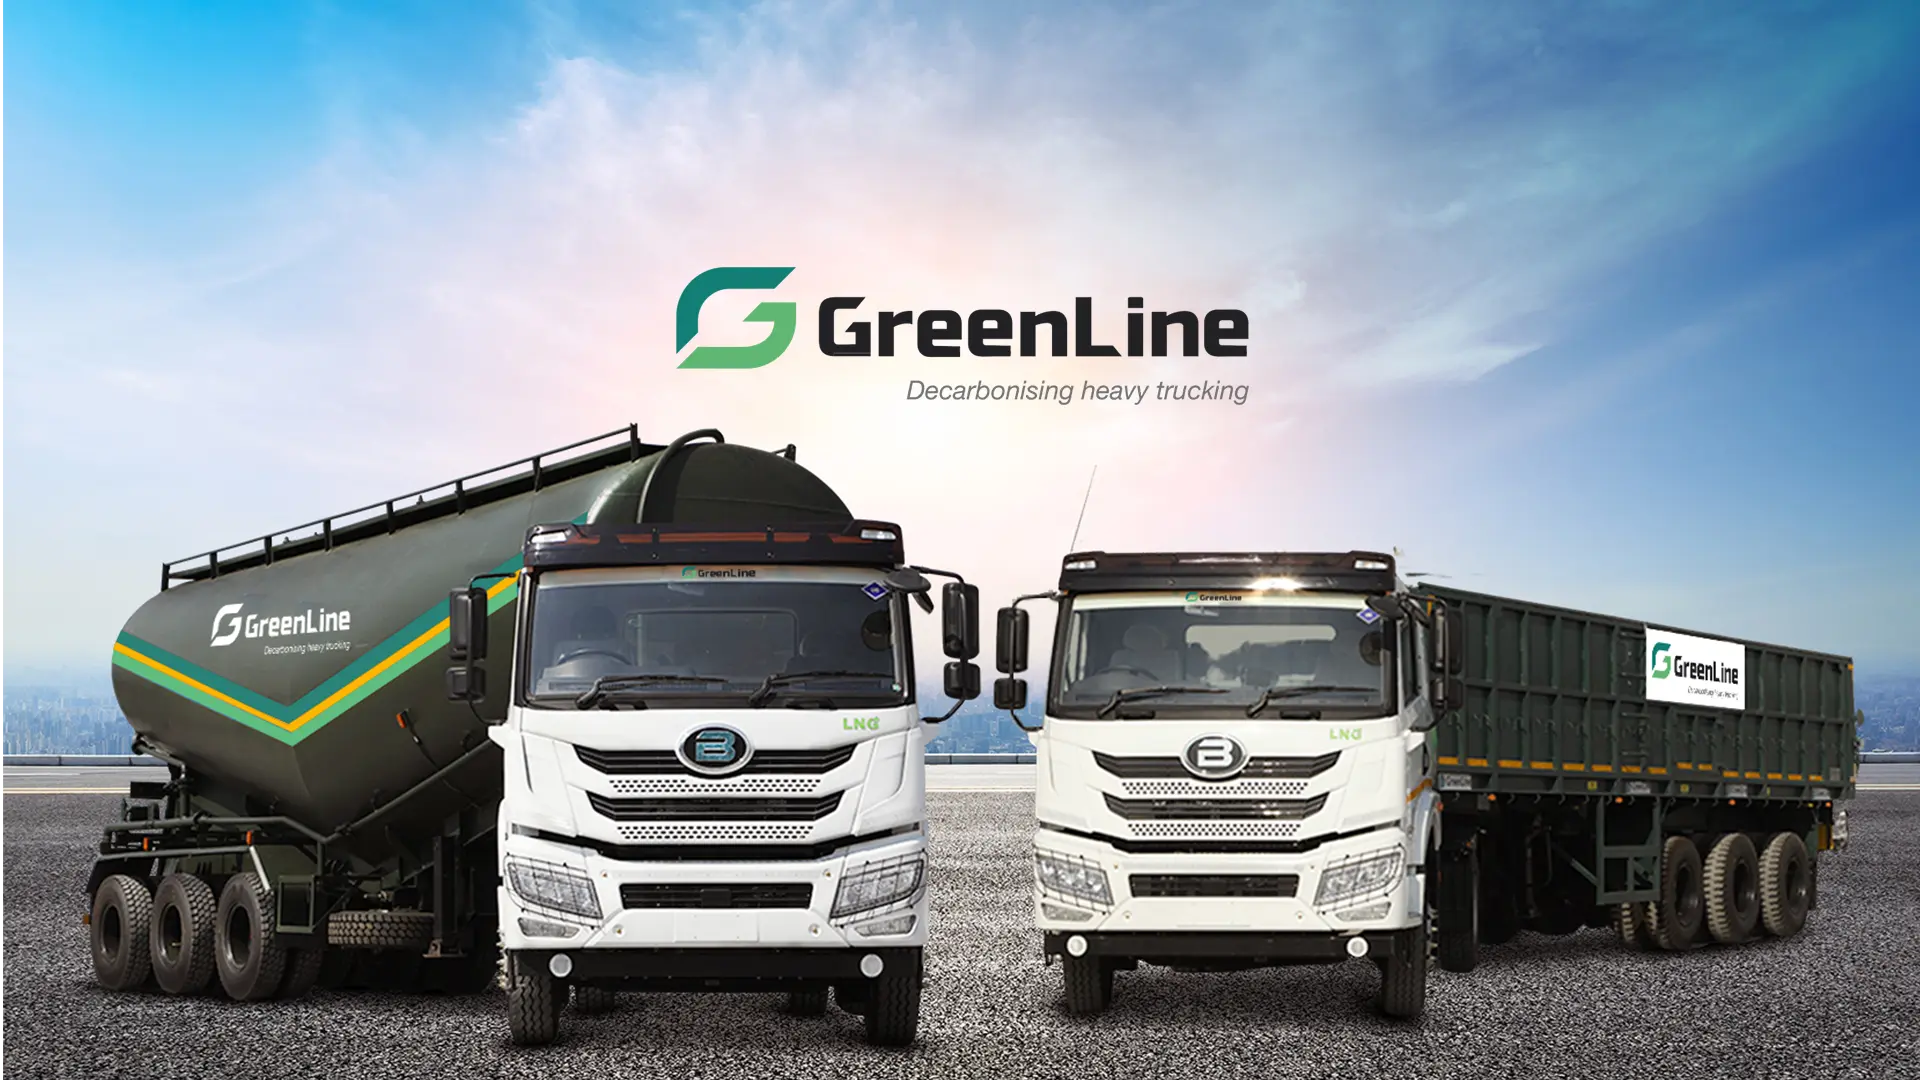 GreenLine to invest Rs. 5,000 cr. to deploy 5,000 more LNG trucks